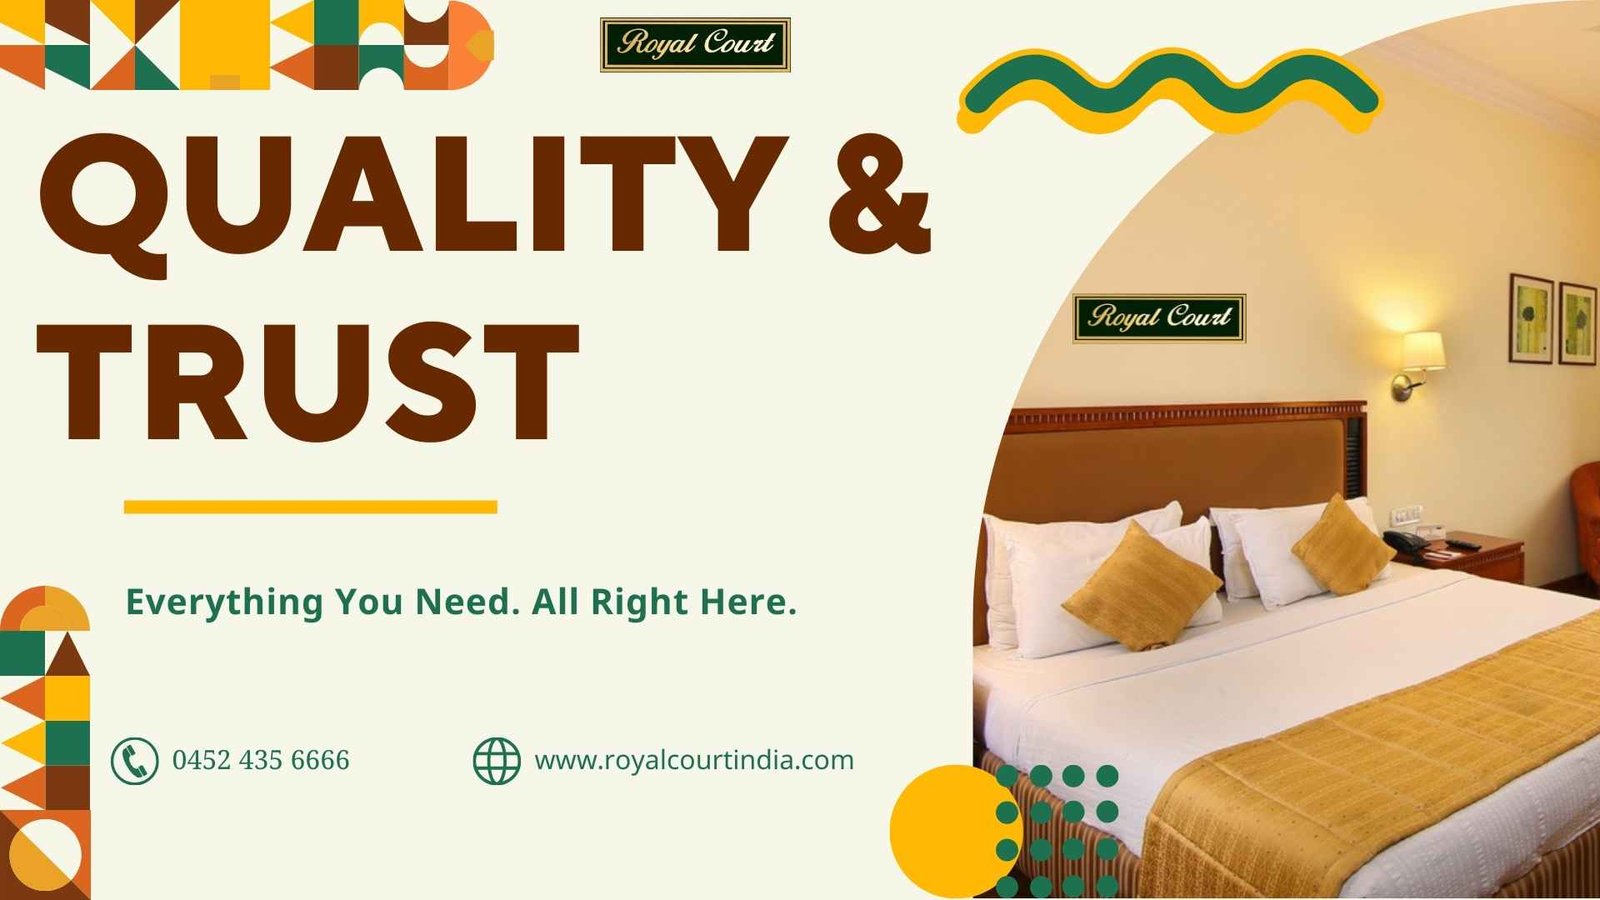 Quality and trust hotel royal court